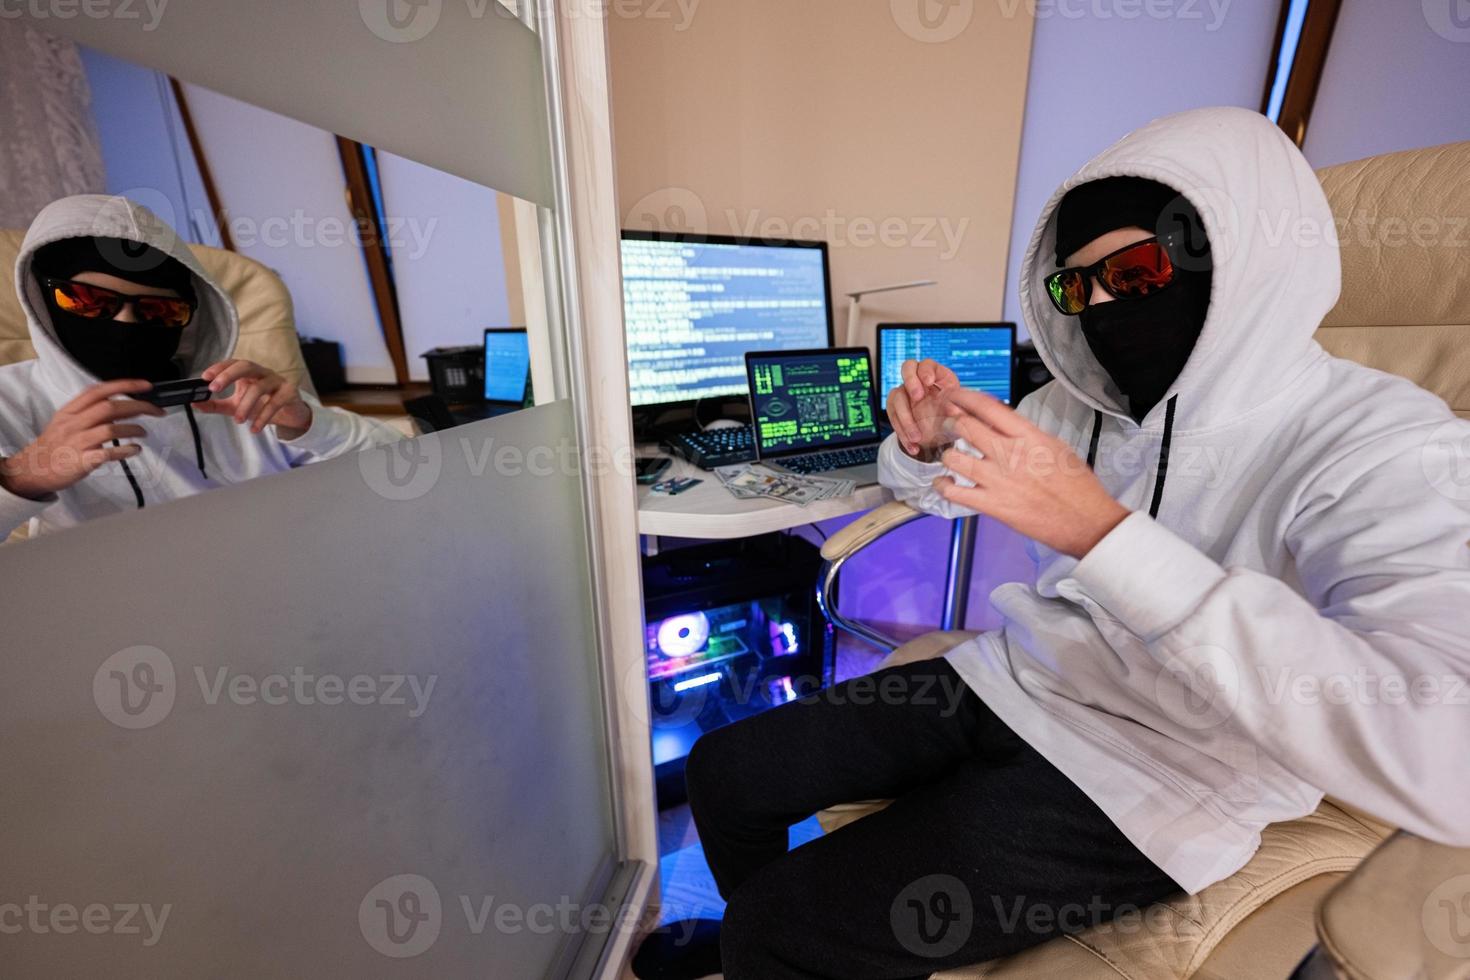 Boy hacker fraudulently use credit card for payment. Internet theft . Man wearing a balaclava and holding a credit card while sat behind a laptop. photo